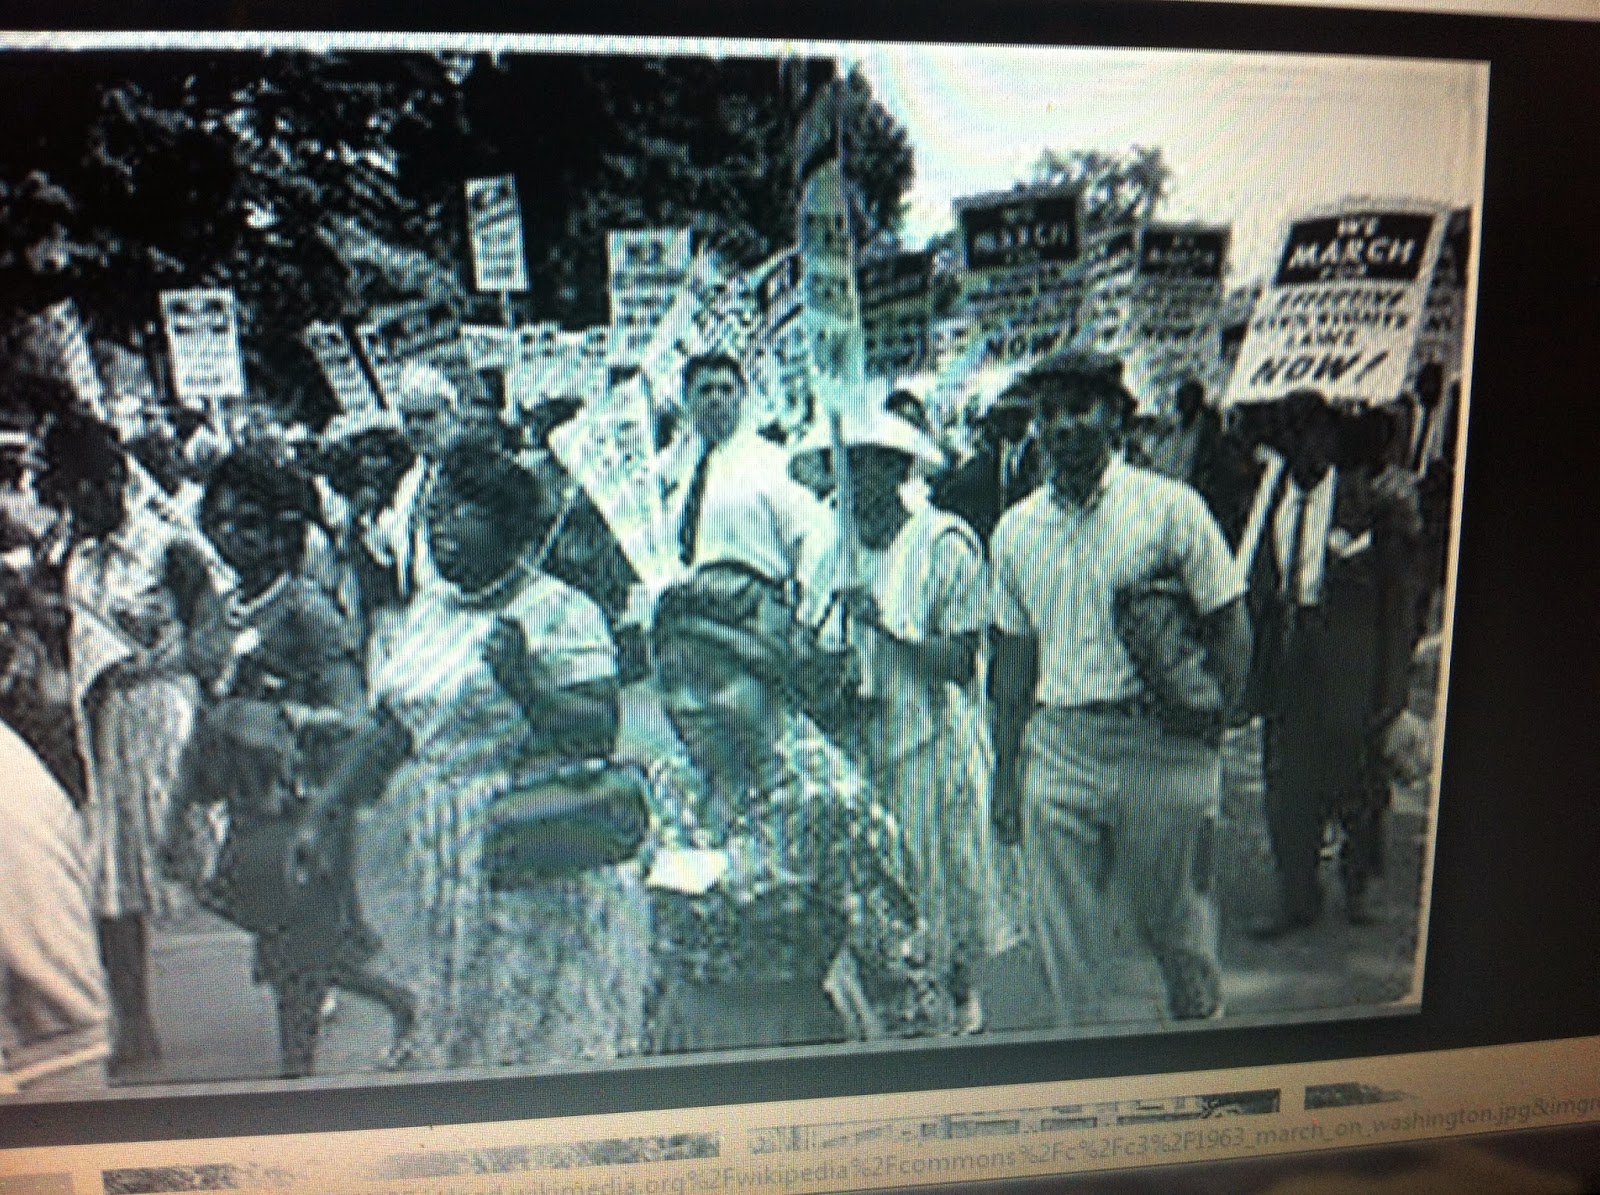 History Of The African-American Civil Rights Movement